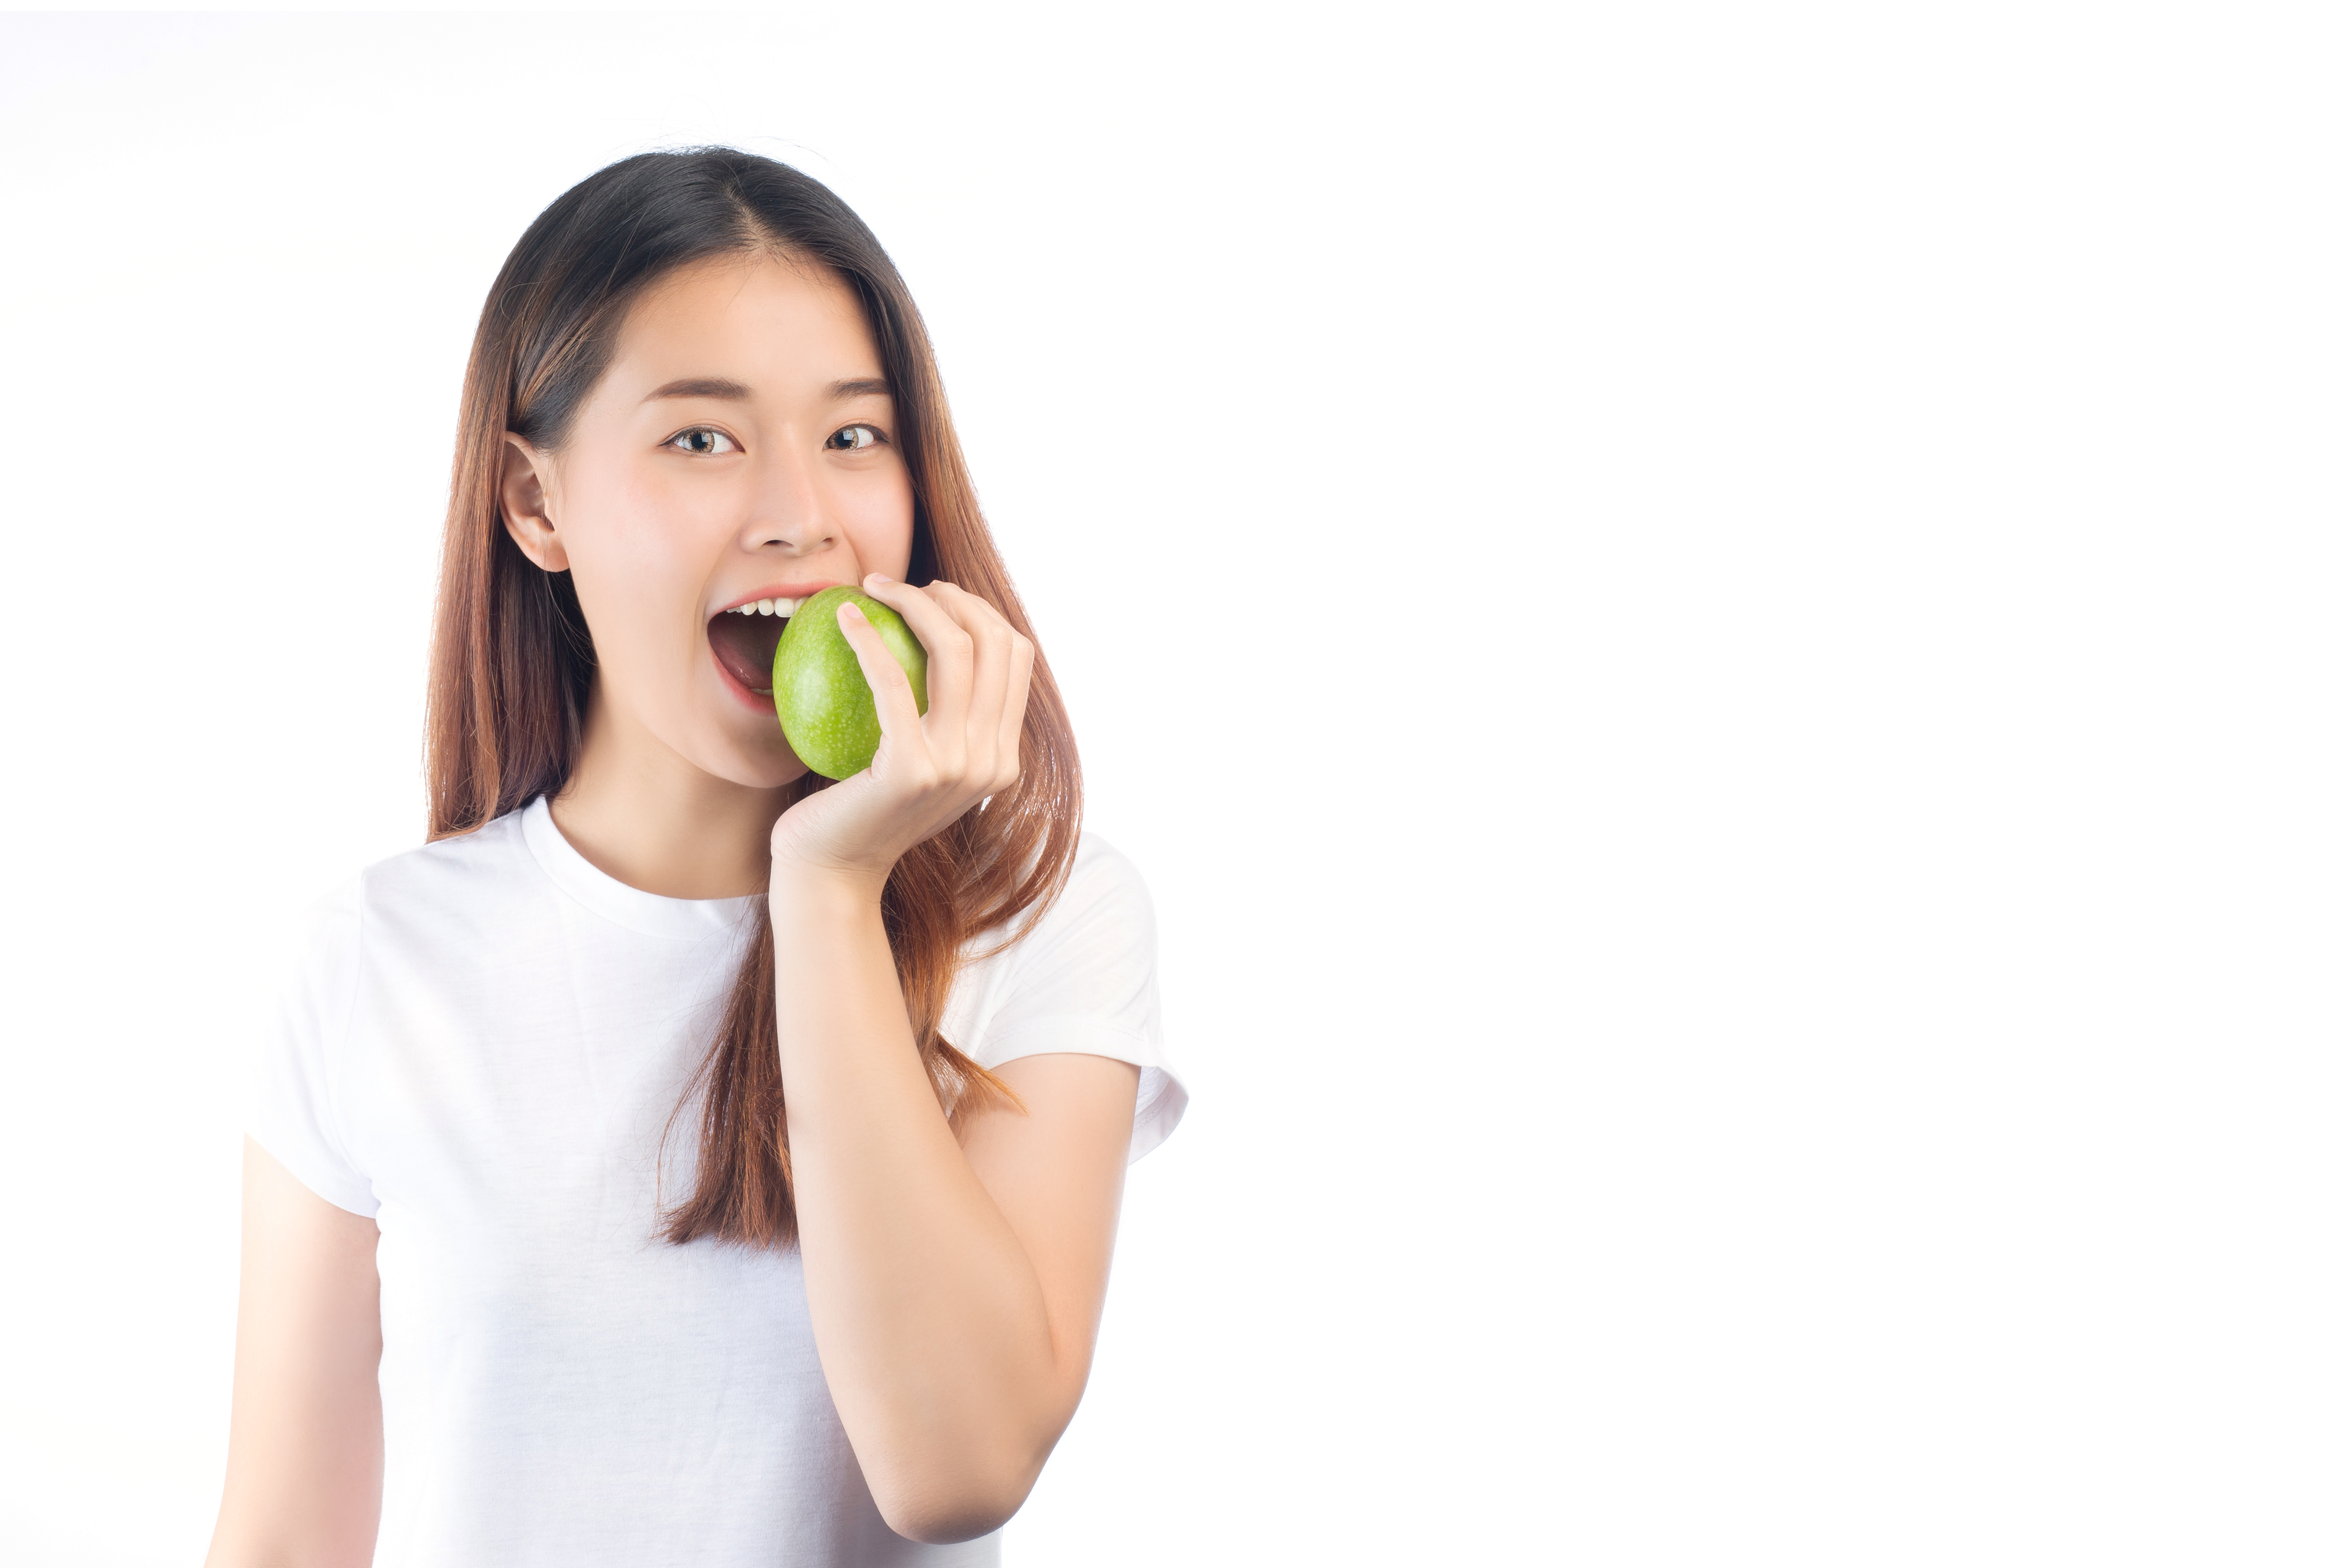 How Diet and Nutrition Affect Dental Health: Foods to Avoid and Foods to Include